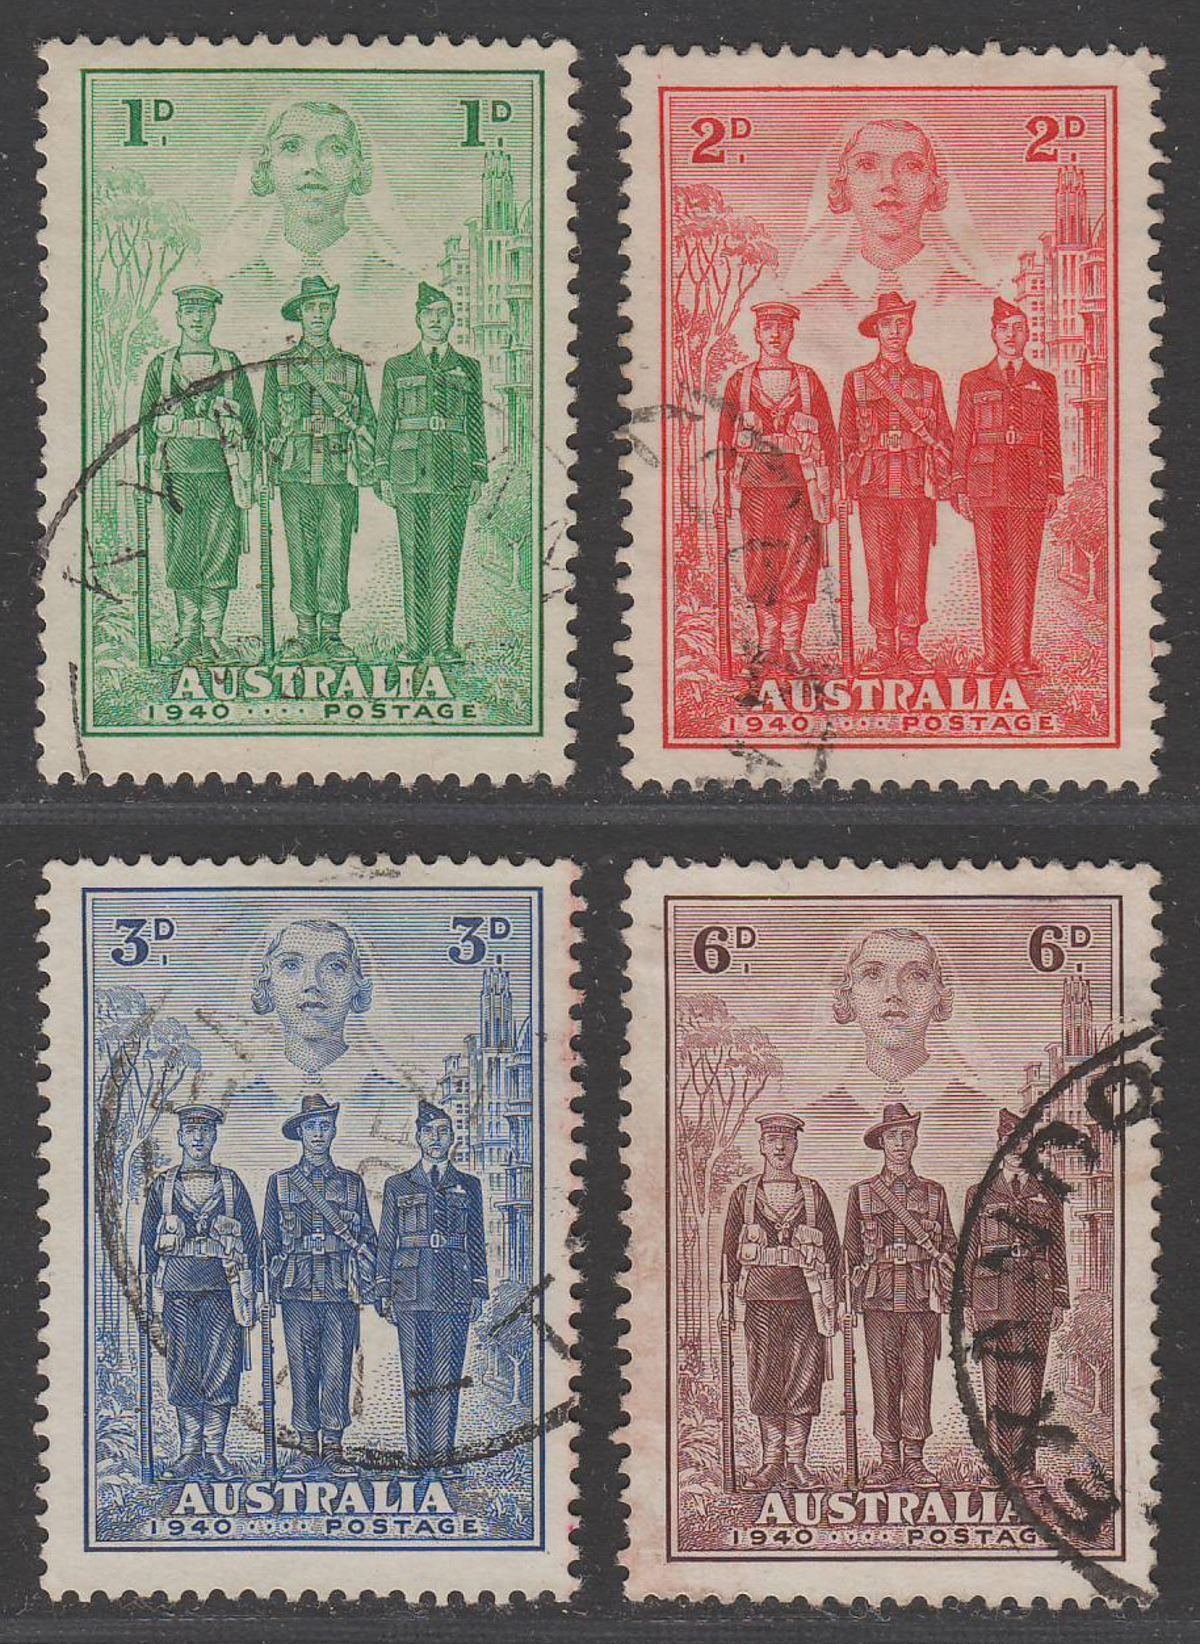 Australia 1940 KGVI Imperial Forces AIF Set Used SG196-199 cat £40 some faults